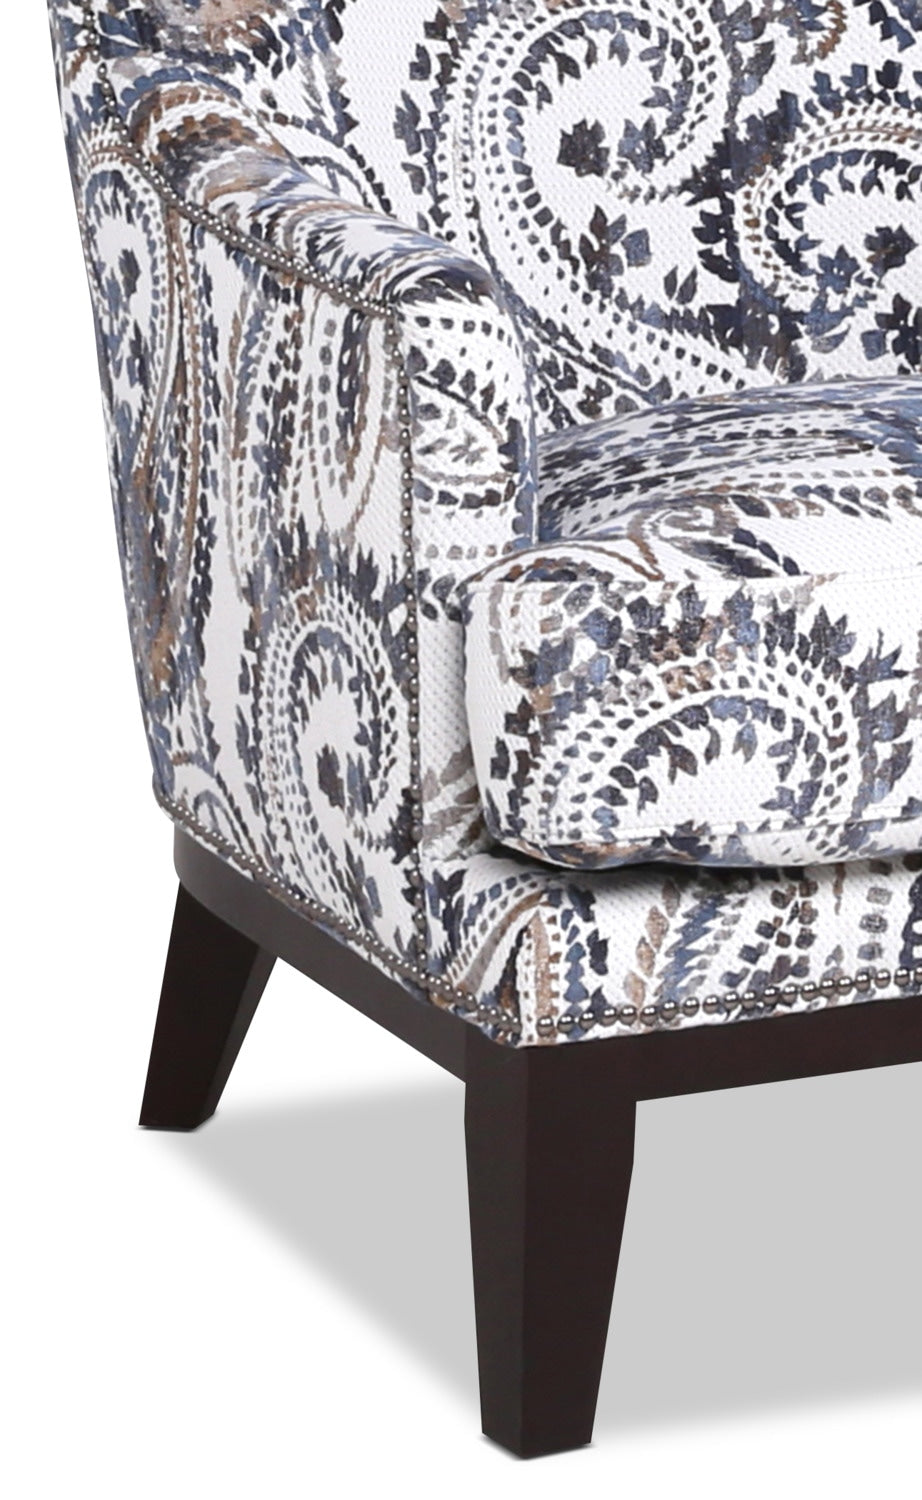 Haden Fabric Accent Chair Paisley The Brick